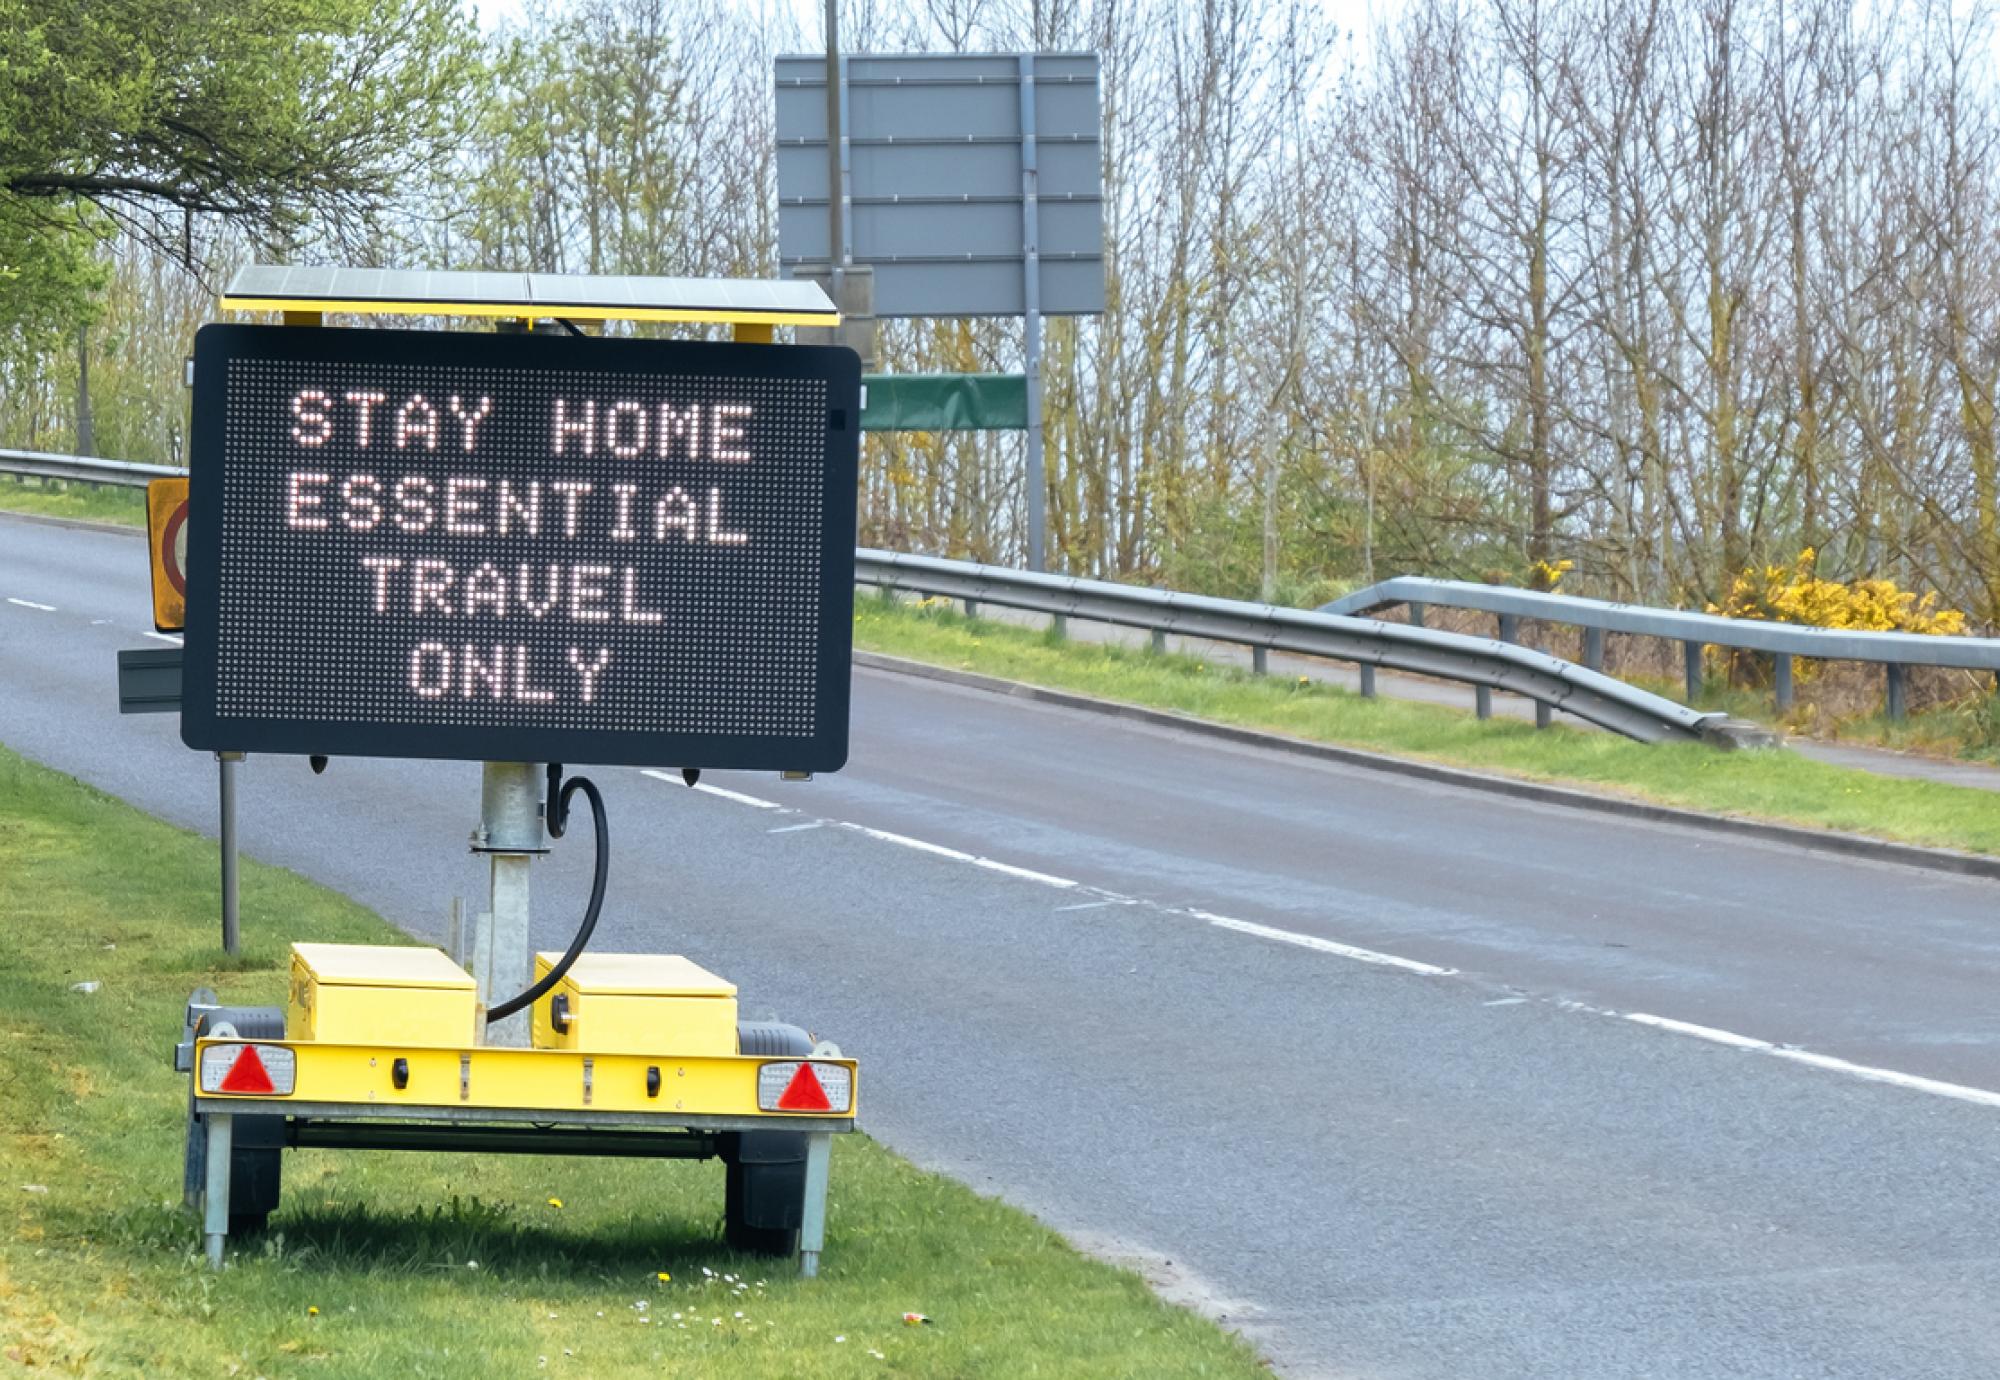 Road sign indicating essential travel only due to the Covid-19 lockdown